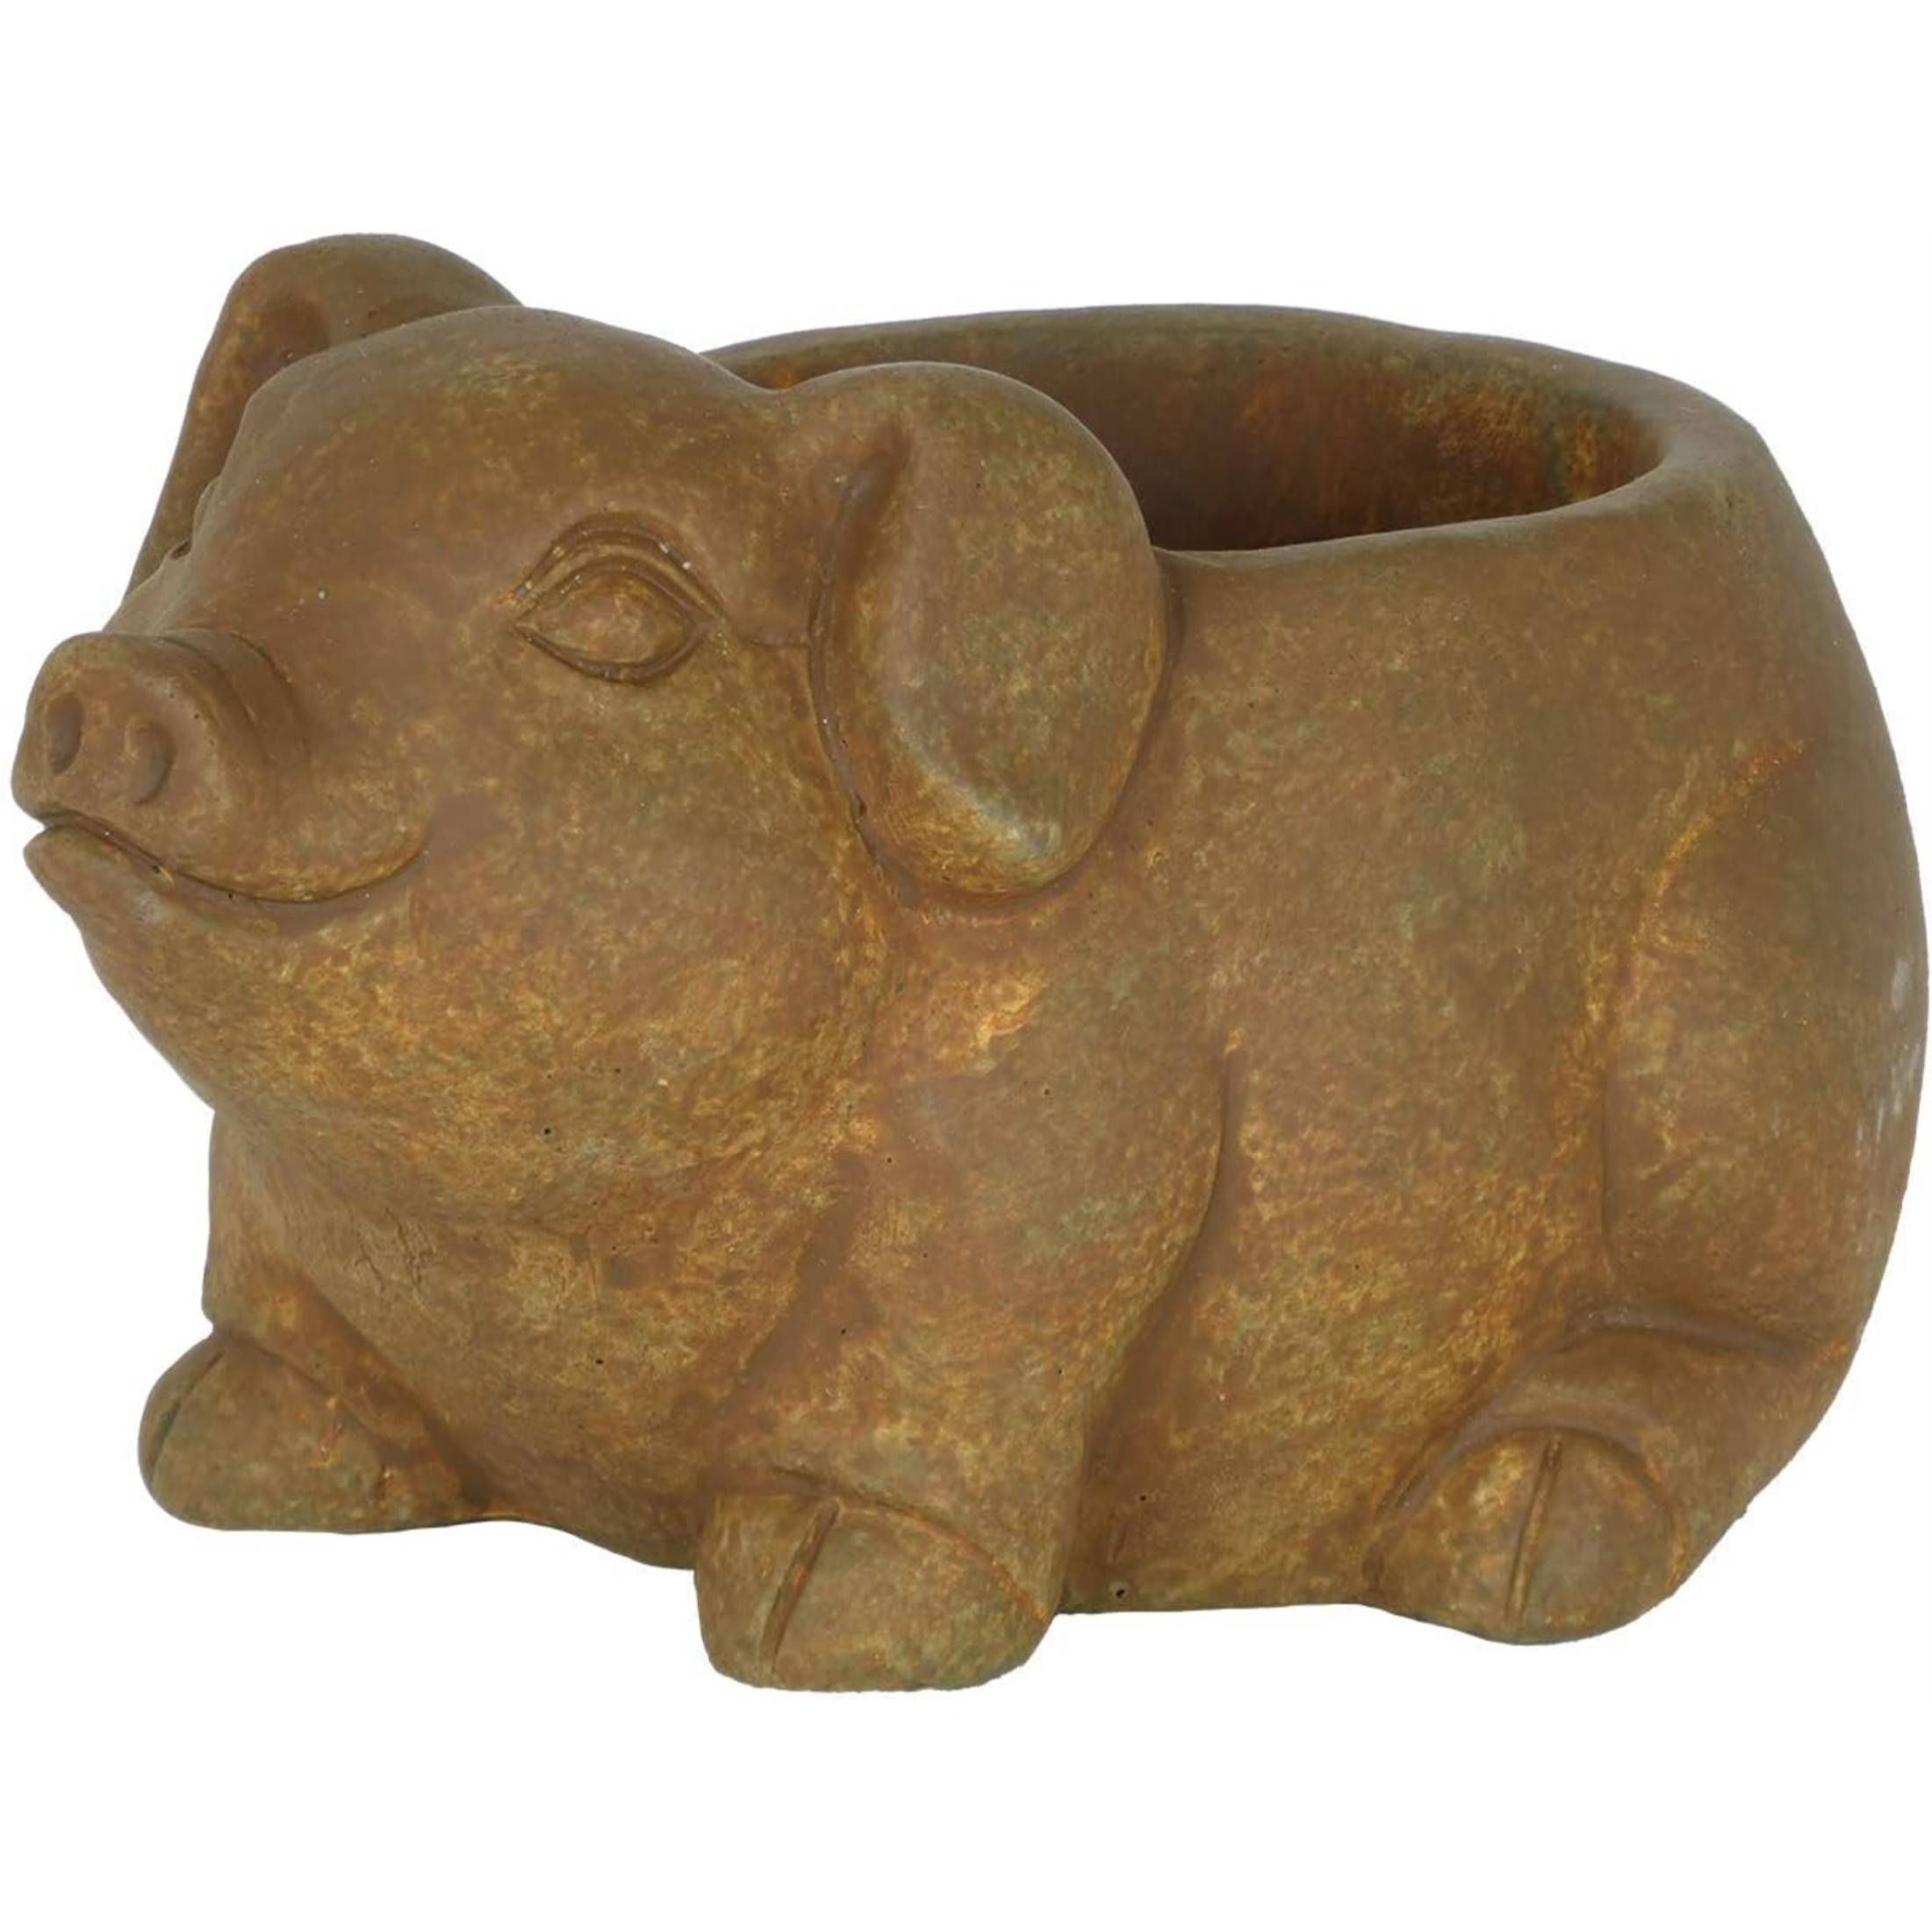 Classic Home and Garden Cement Buddies Indoor Outdoor Piglet Planter with Drainage Hole